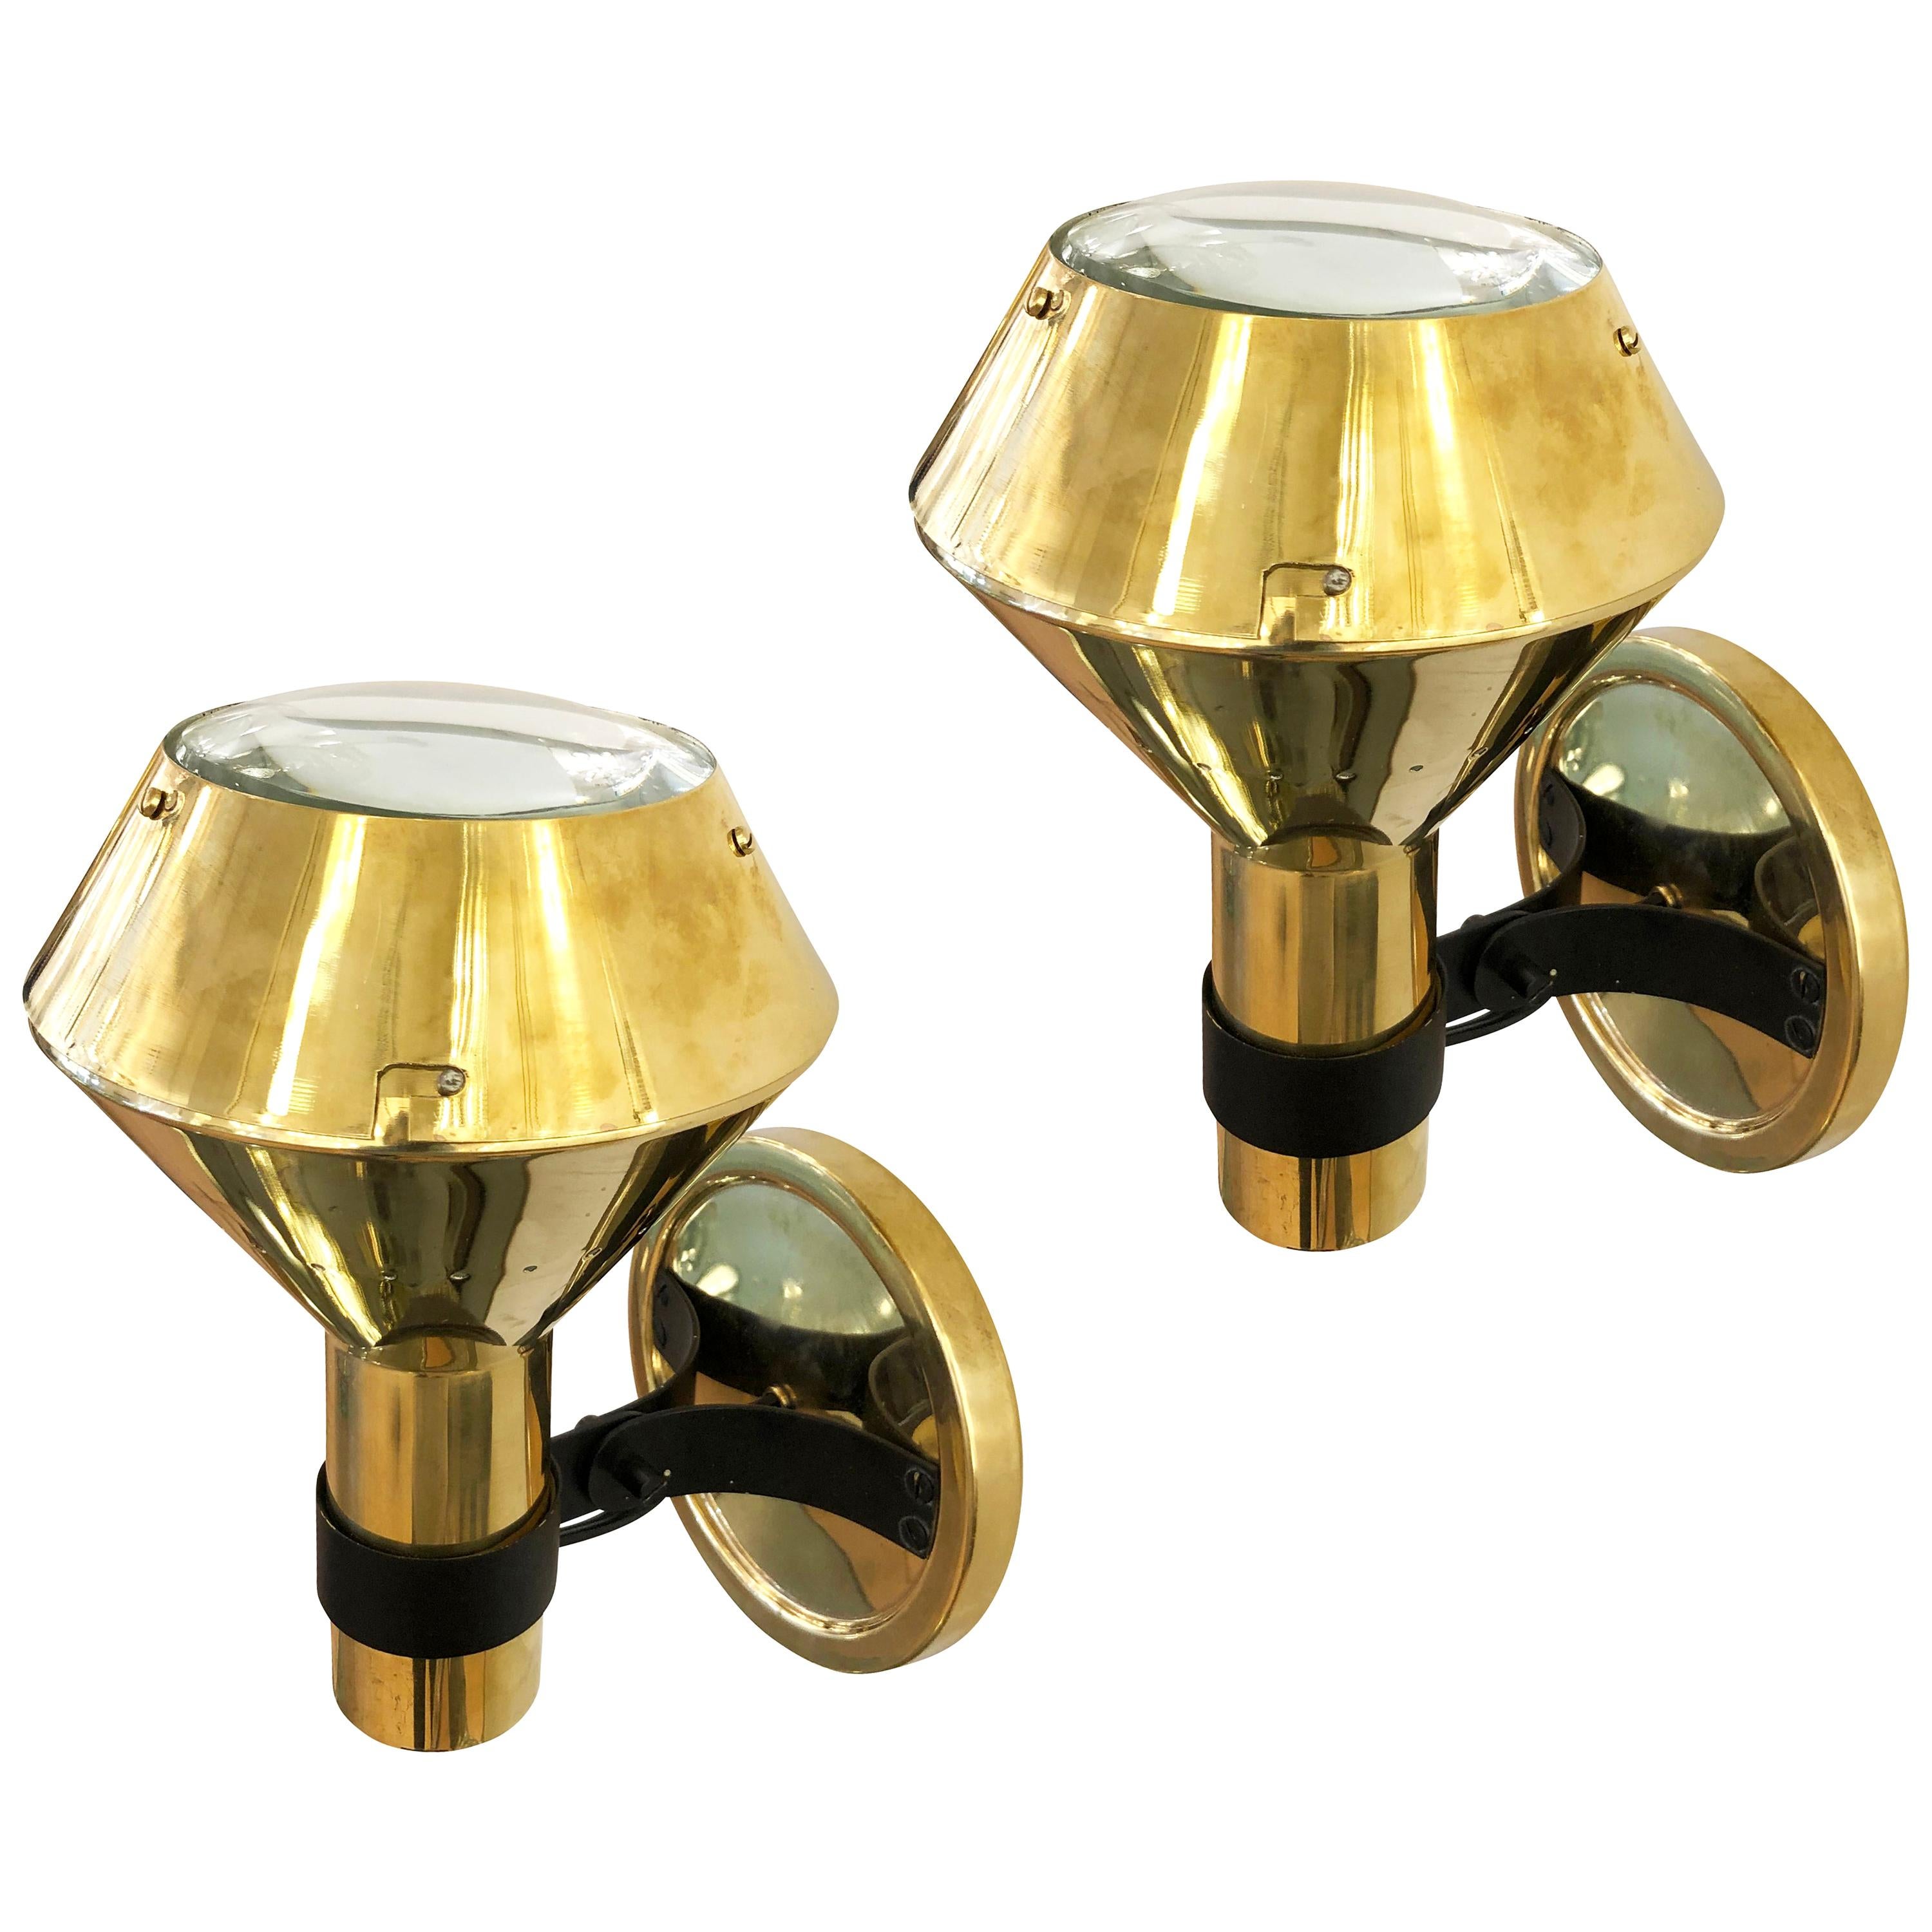 Brass Sconces by Candle, 3 Pairs Available